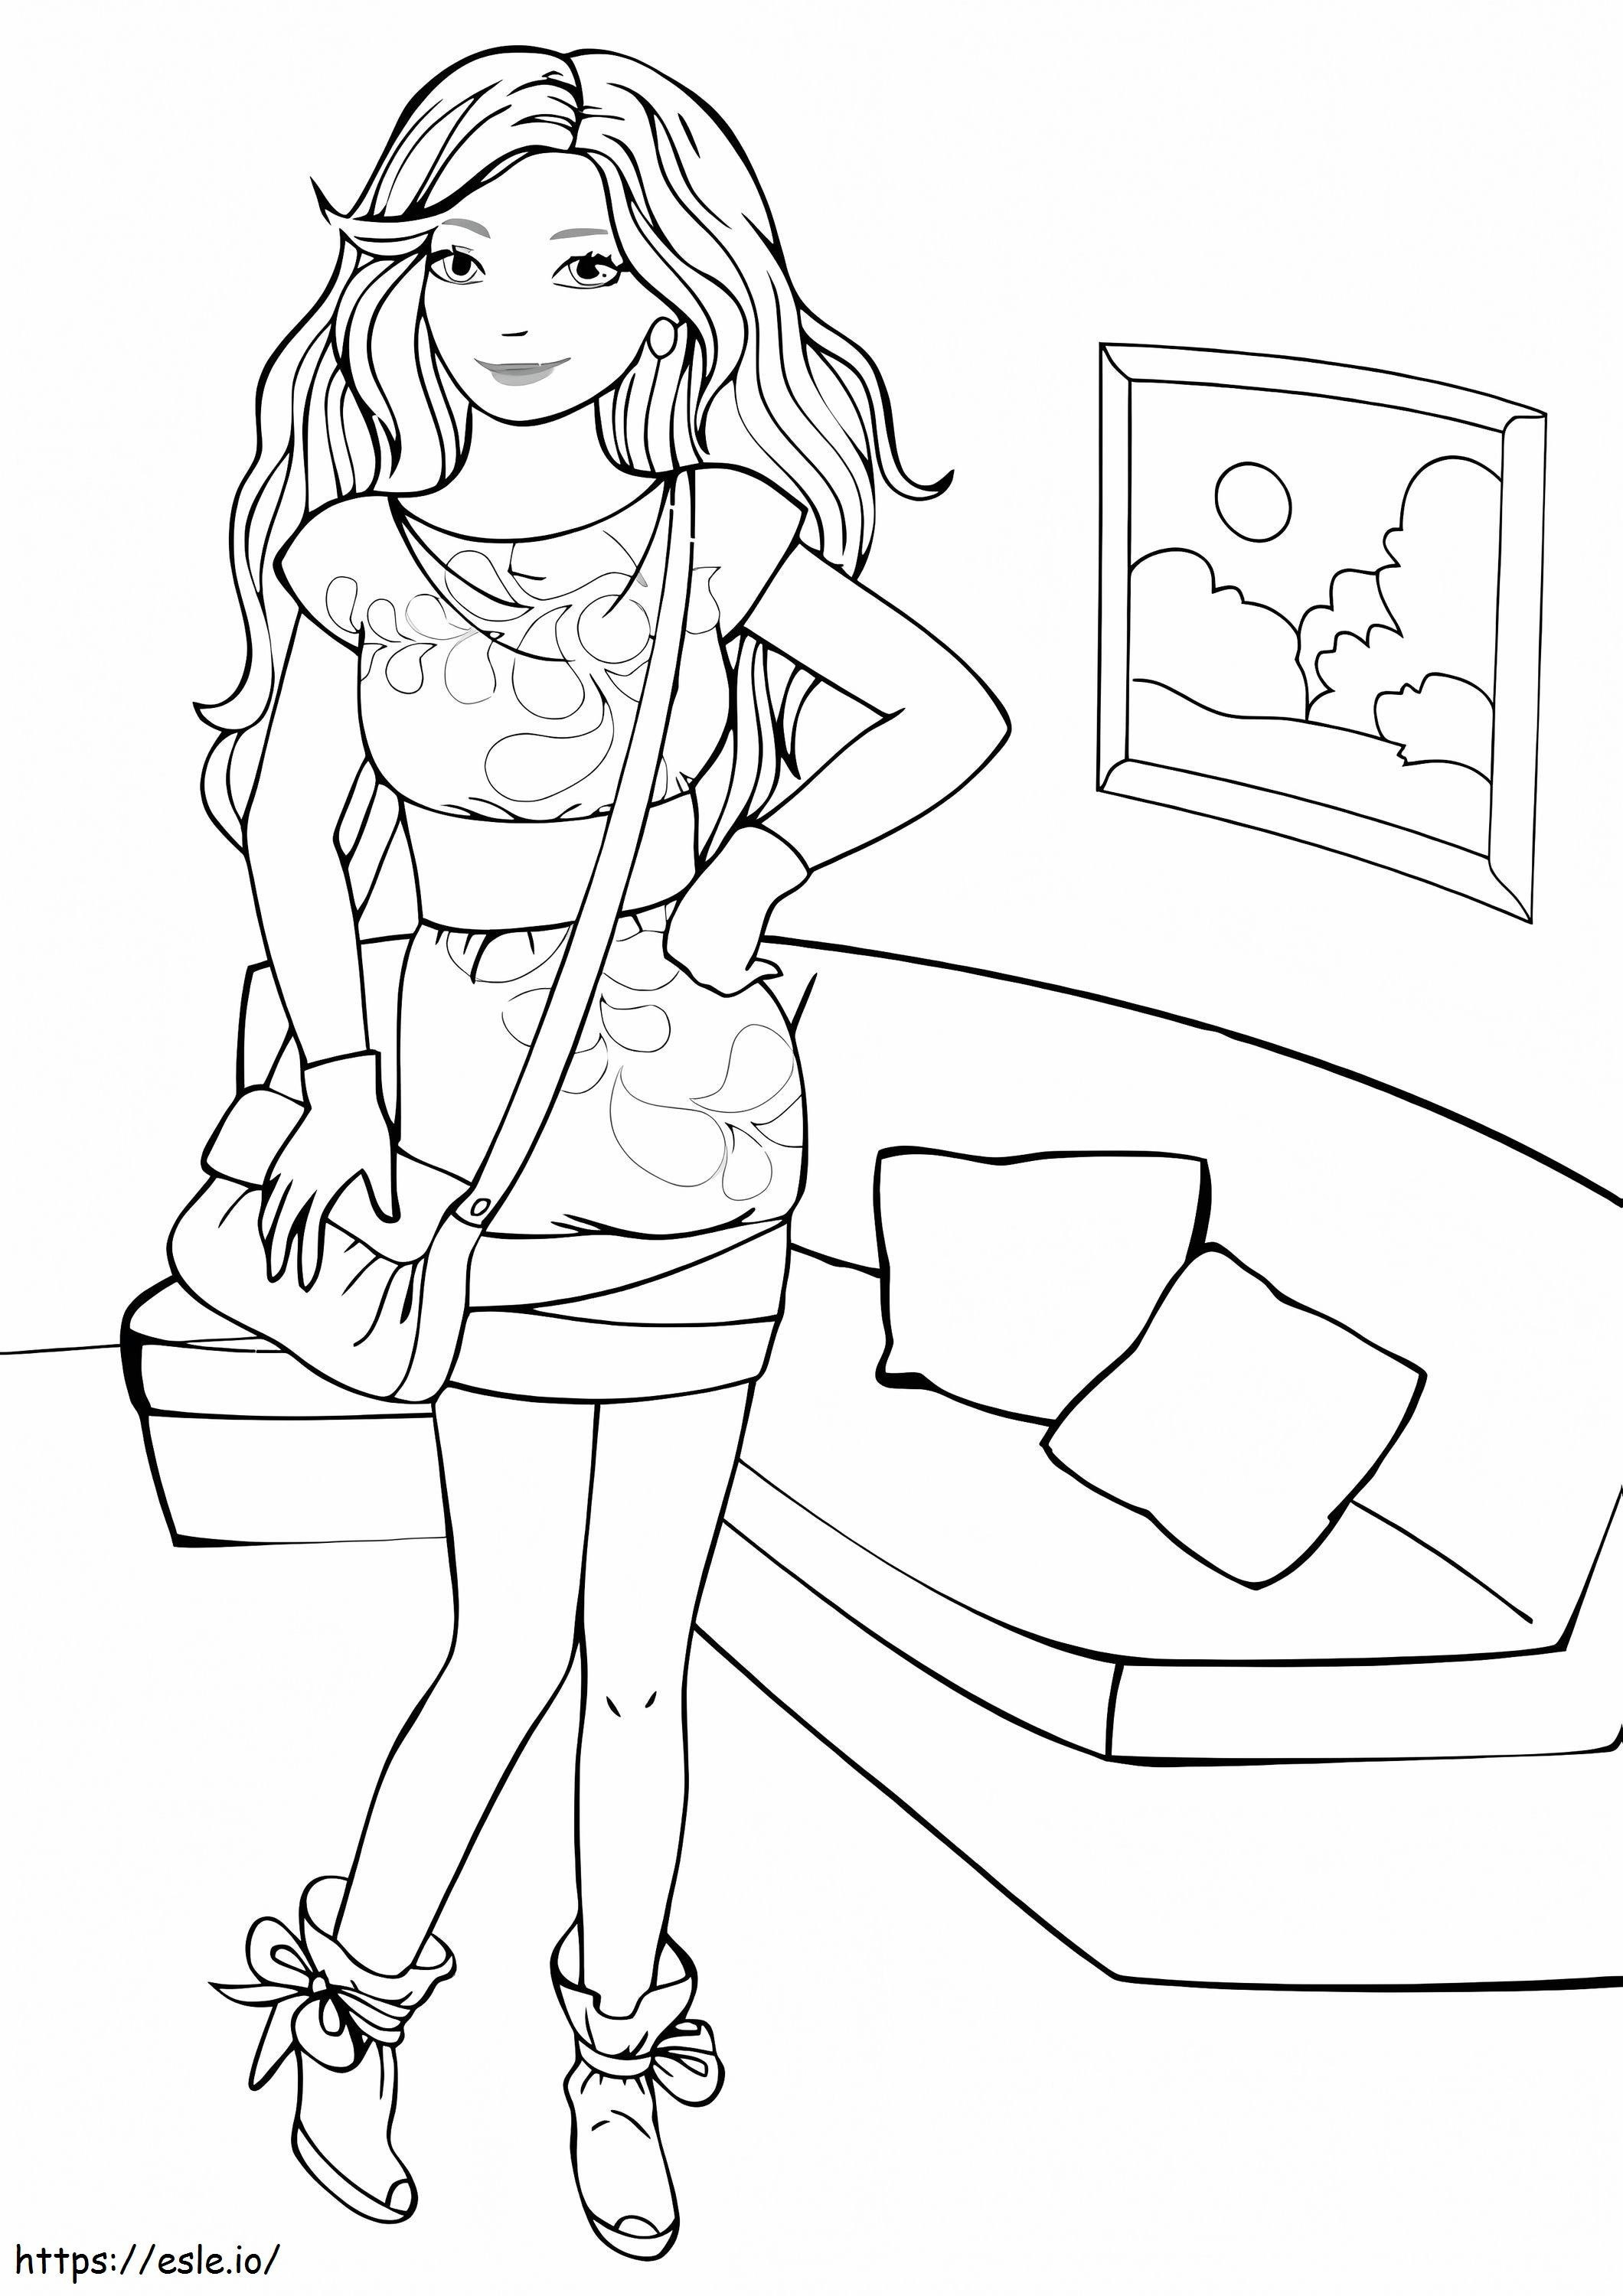 Girl Going To A Party coloring page